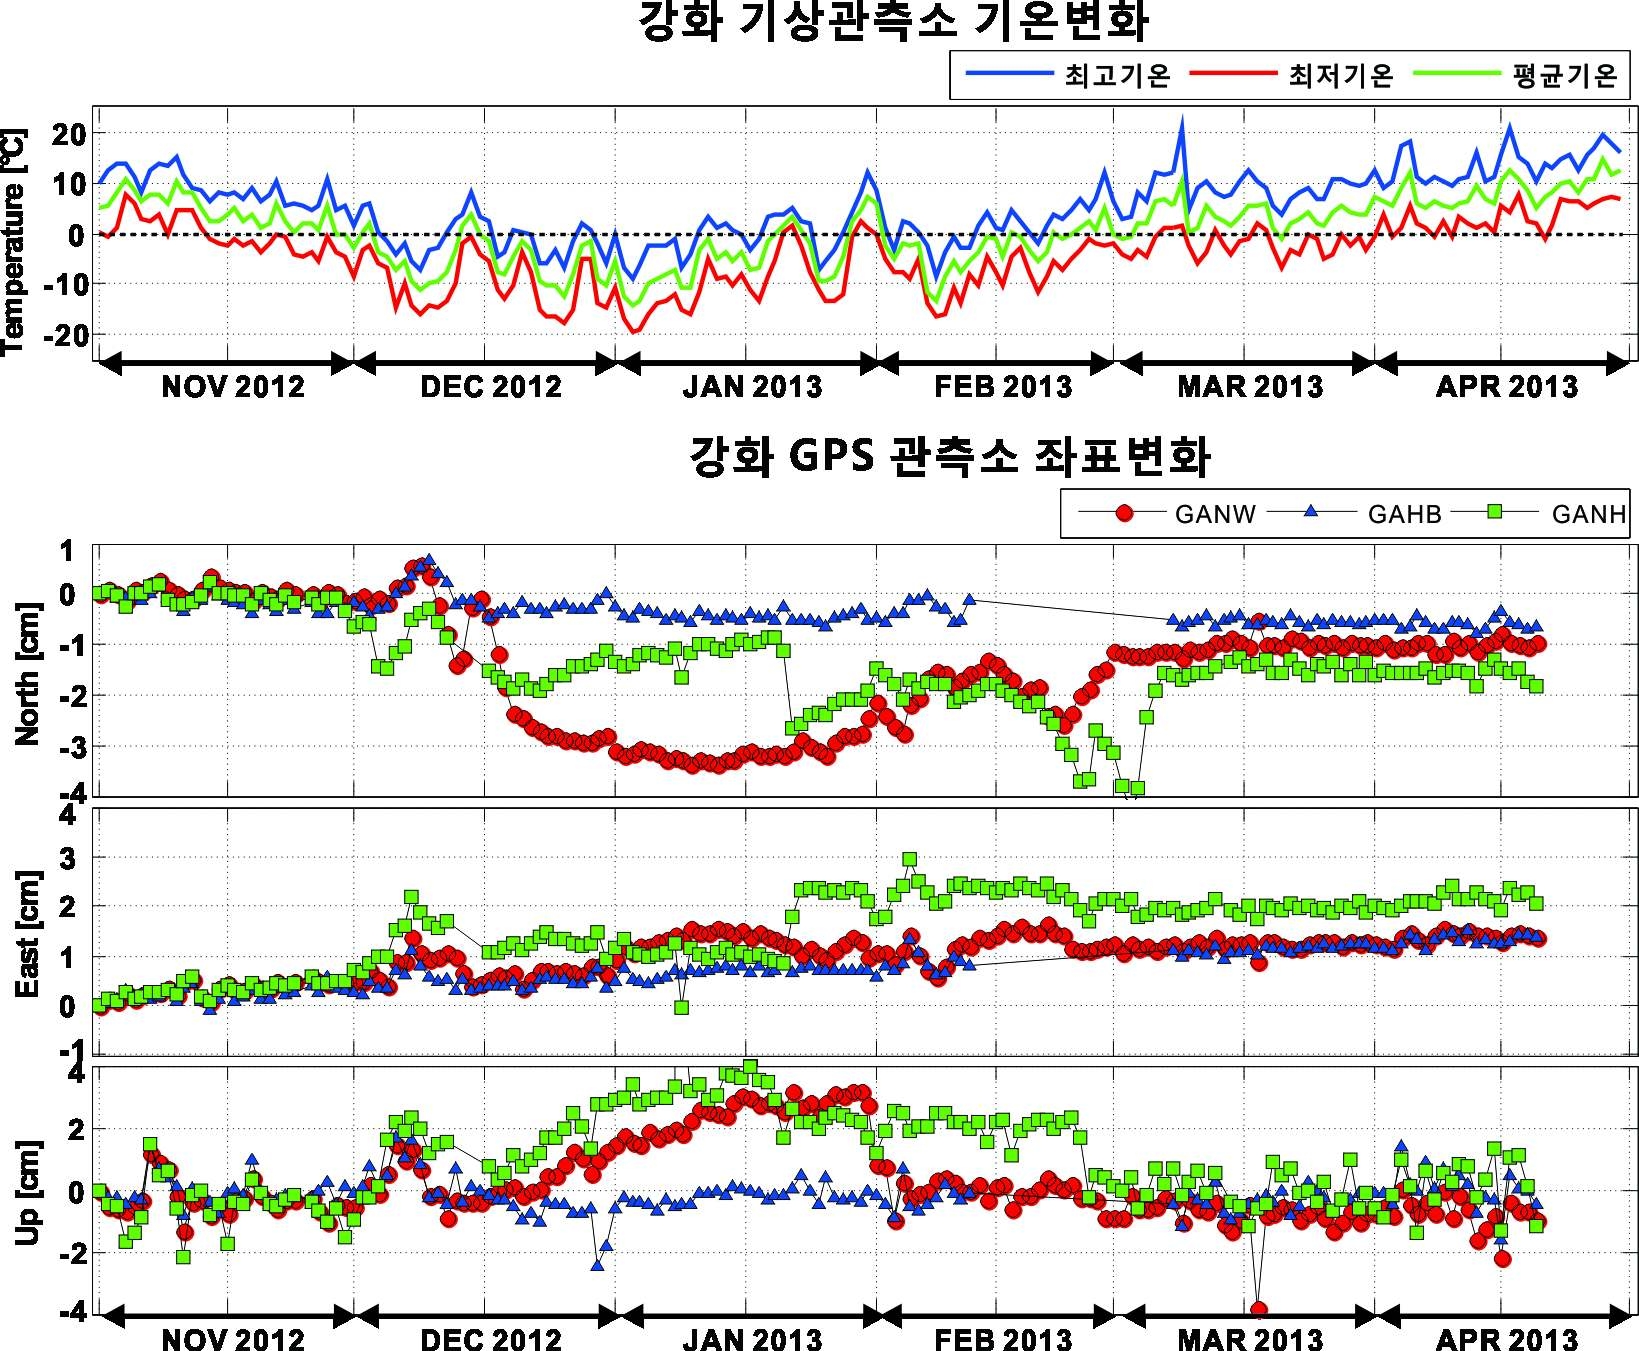 Fig. 3.4.4 Time seriese analysis of three GPS stations installed at Gangwha meteorological observatory.